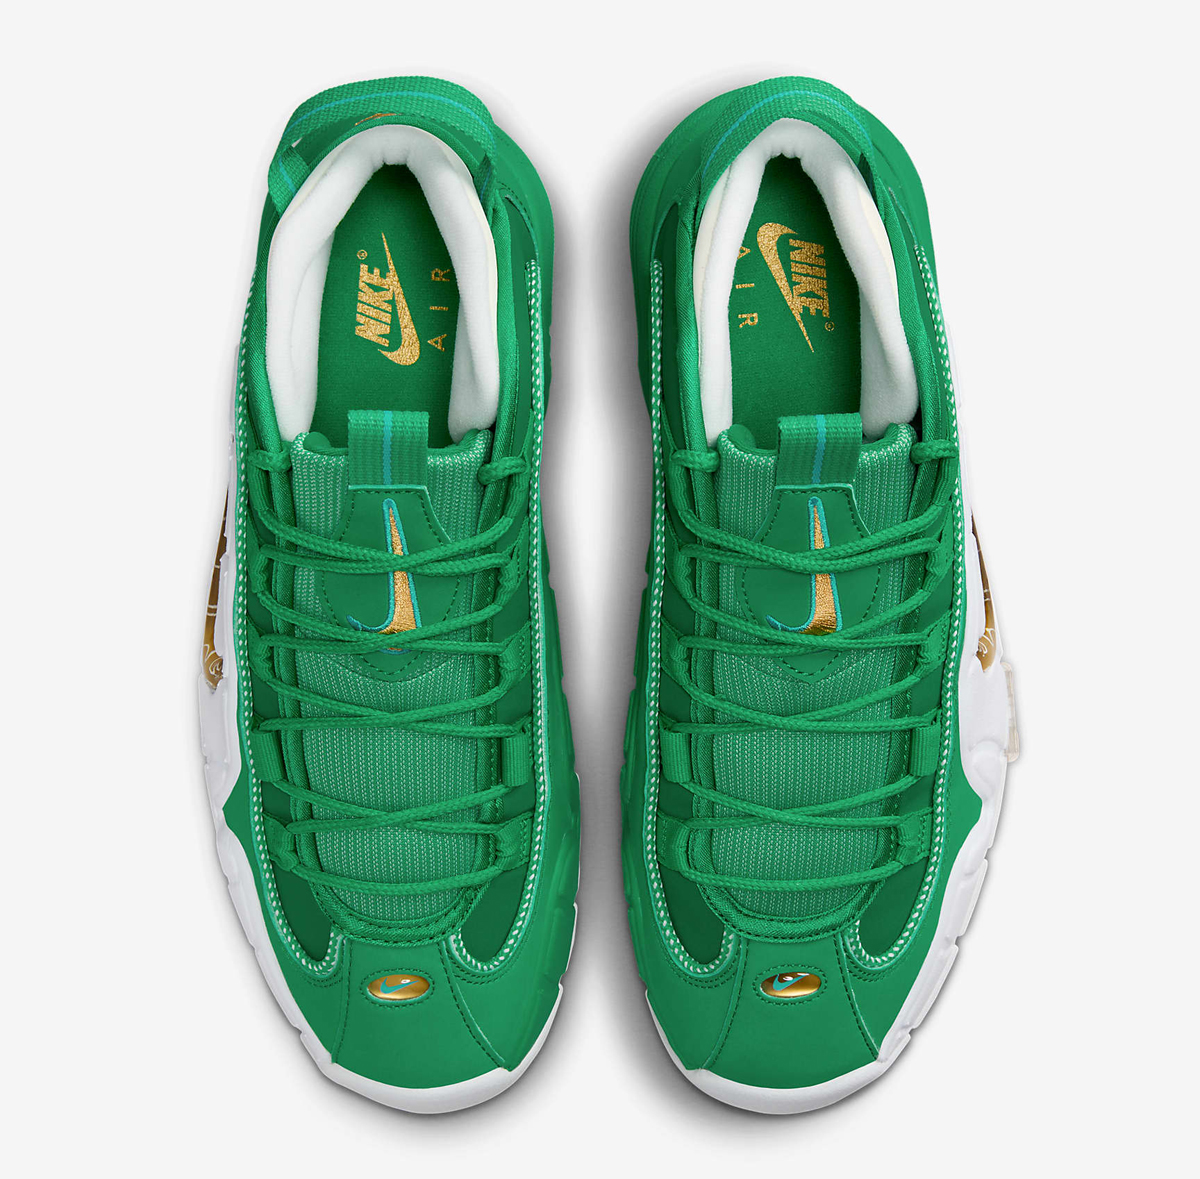 Nike-Air-Max-Penny-Stadium-Green-Release-Date-4